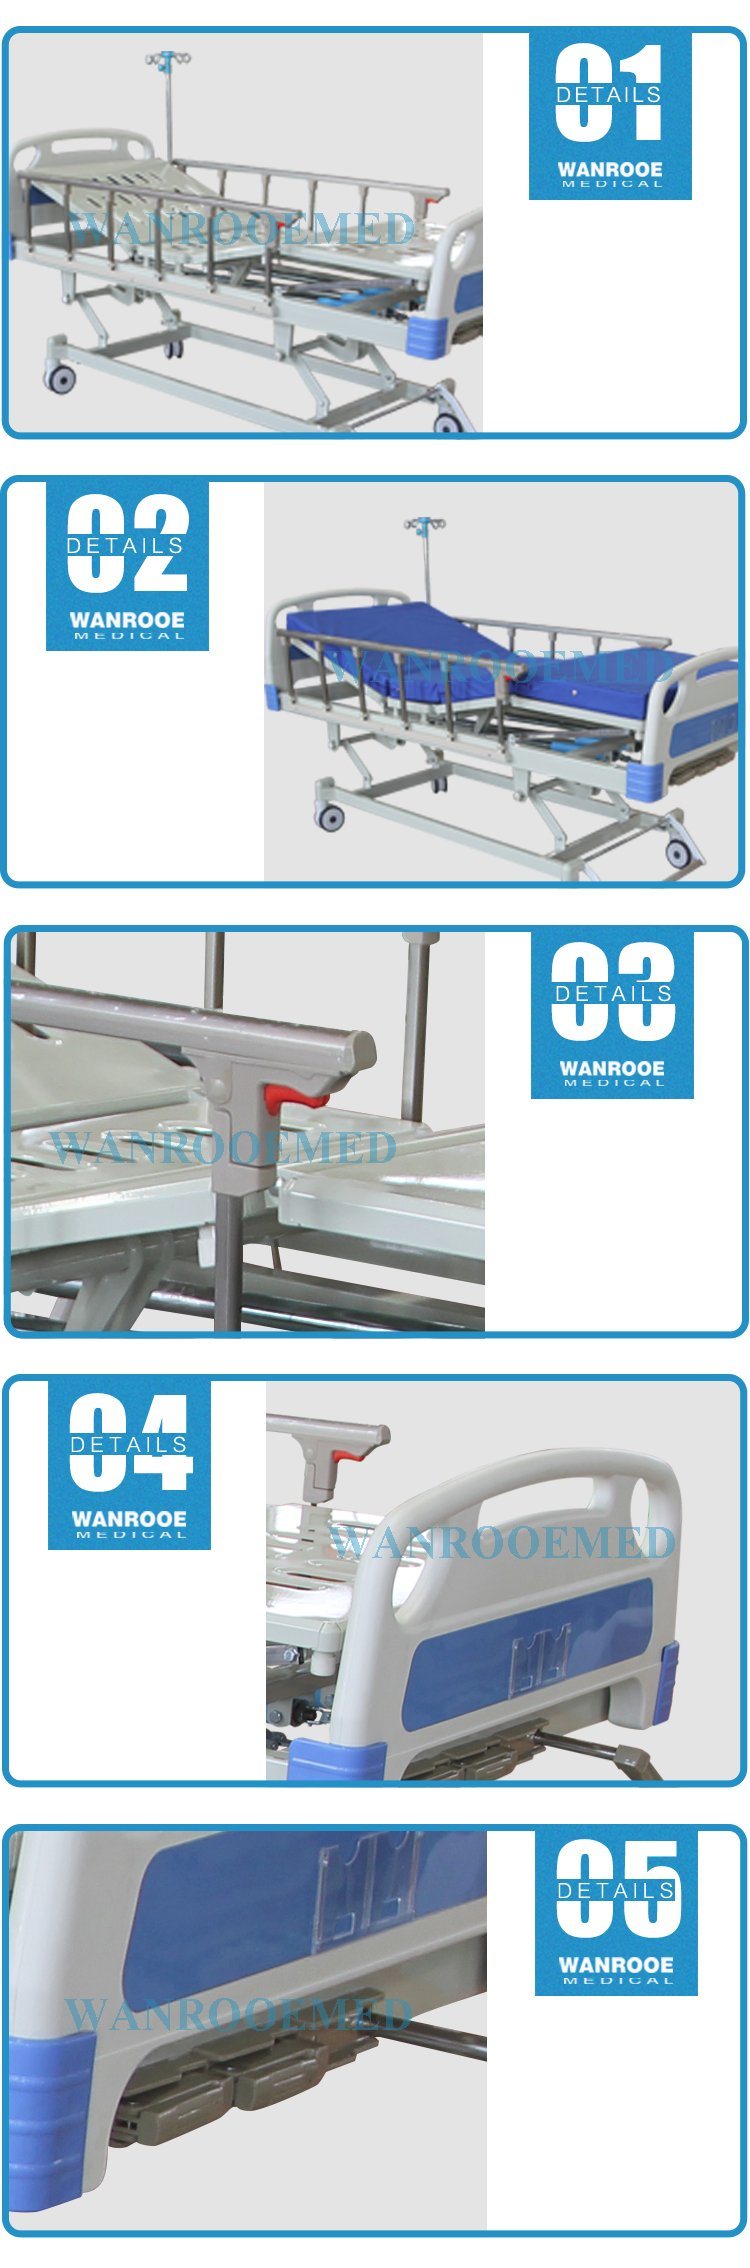 Bam302 Medical Furniture Manual Stainless Steel Hospital Bed